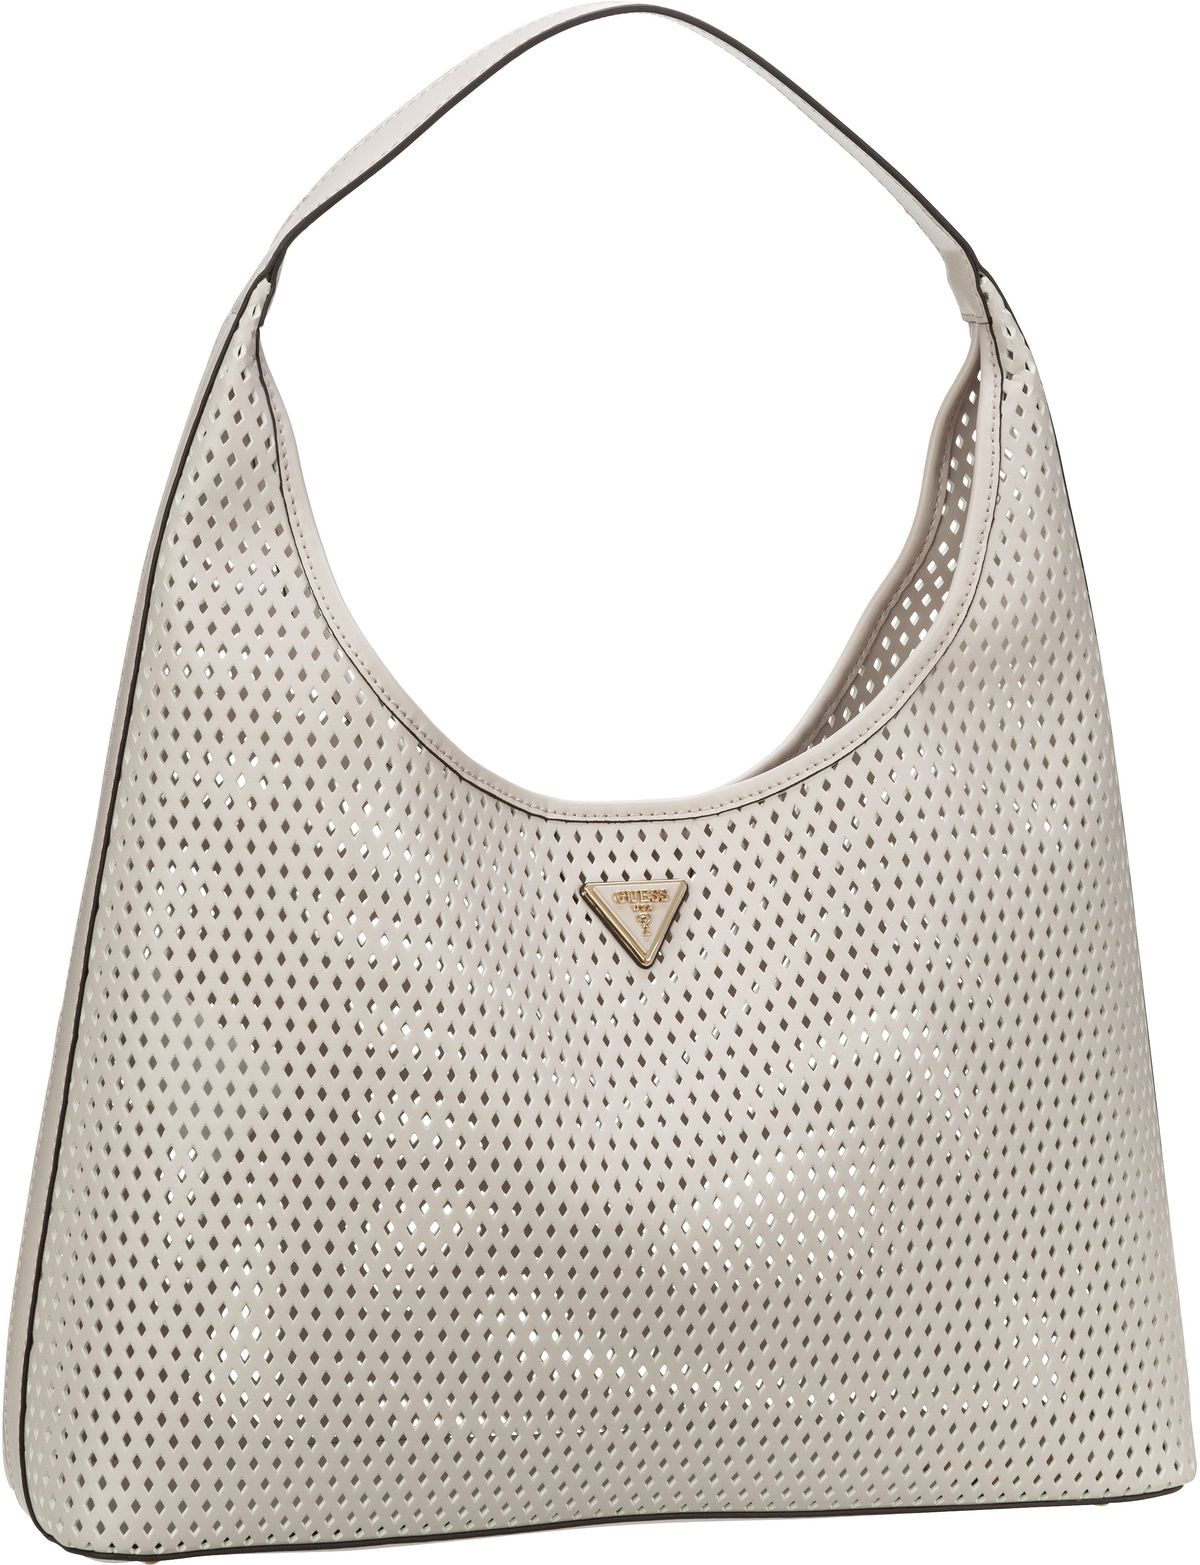 Guess Schultertasche Vikky Hobo WP Stone (14.1 Liter)